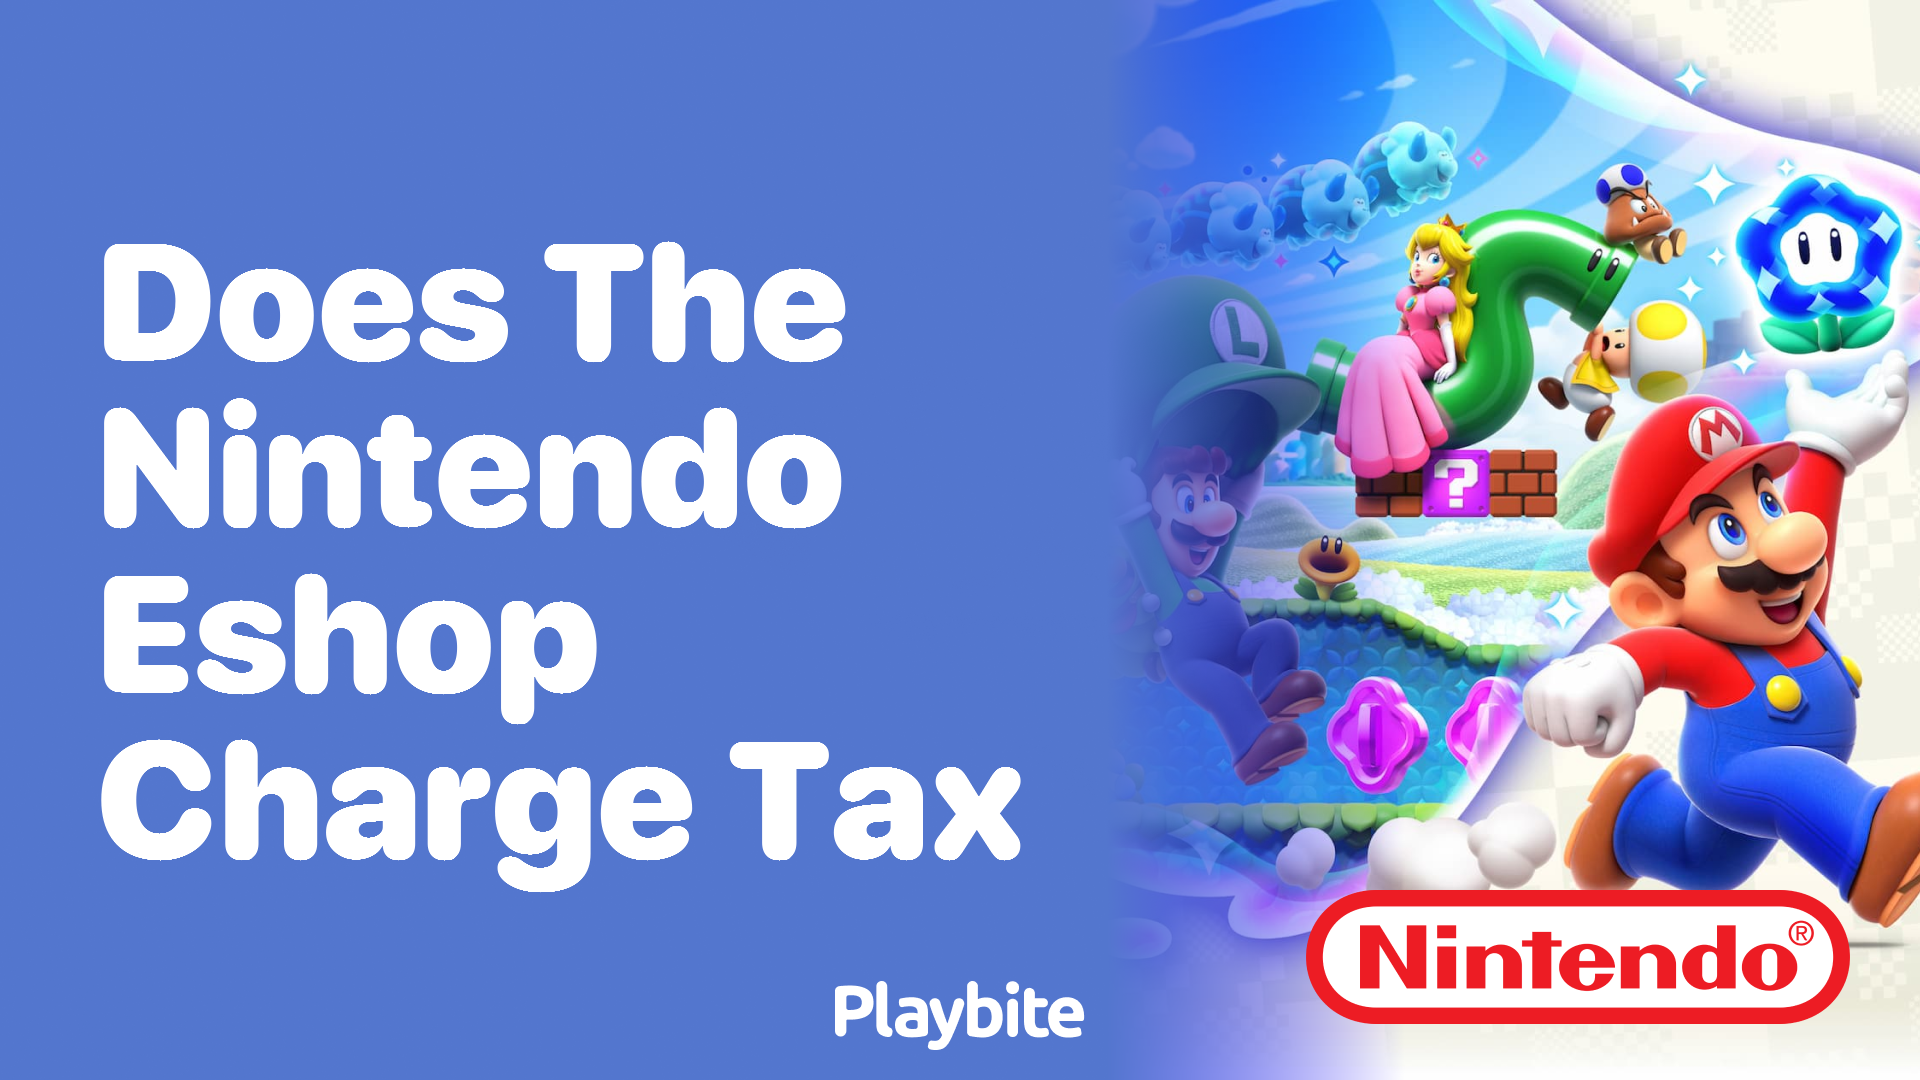 Does the Nintendo eShop Charge Tax? Find Out Here!